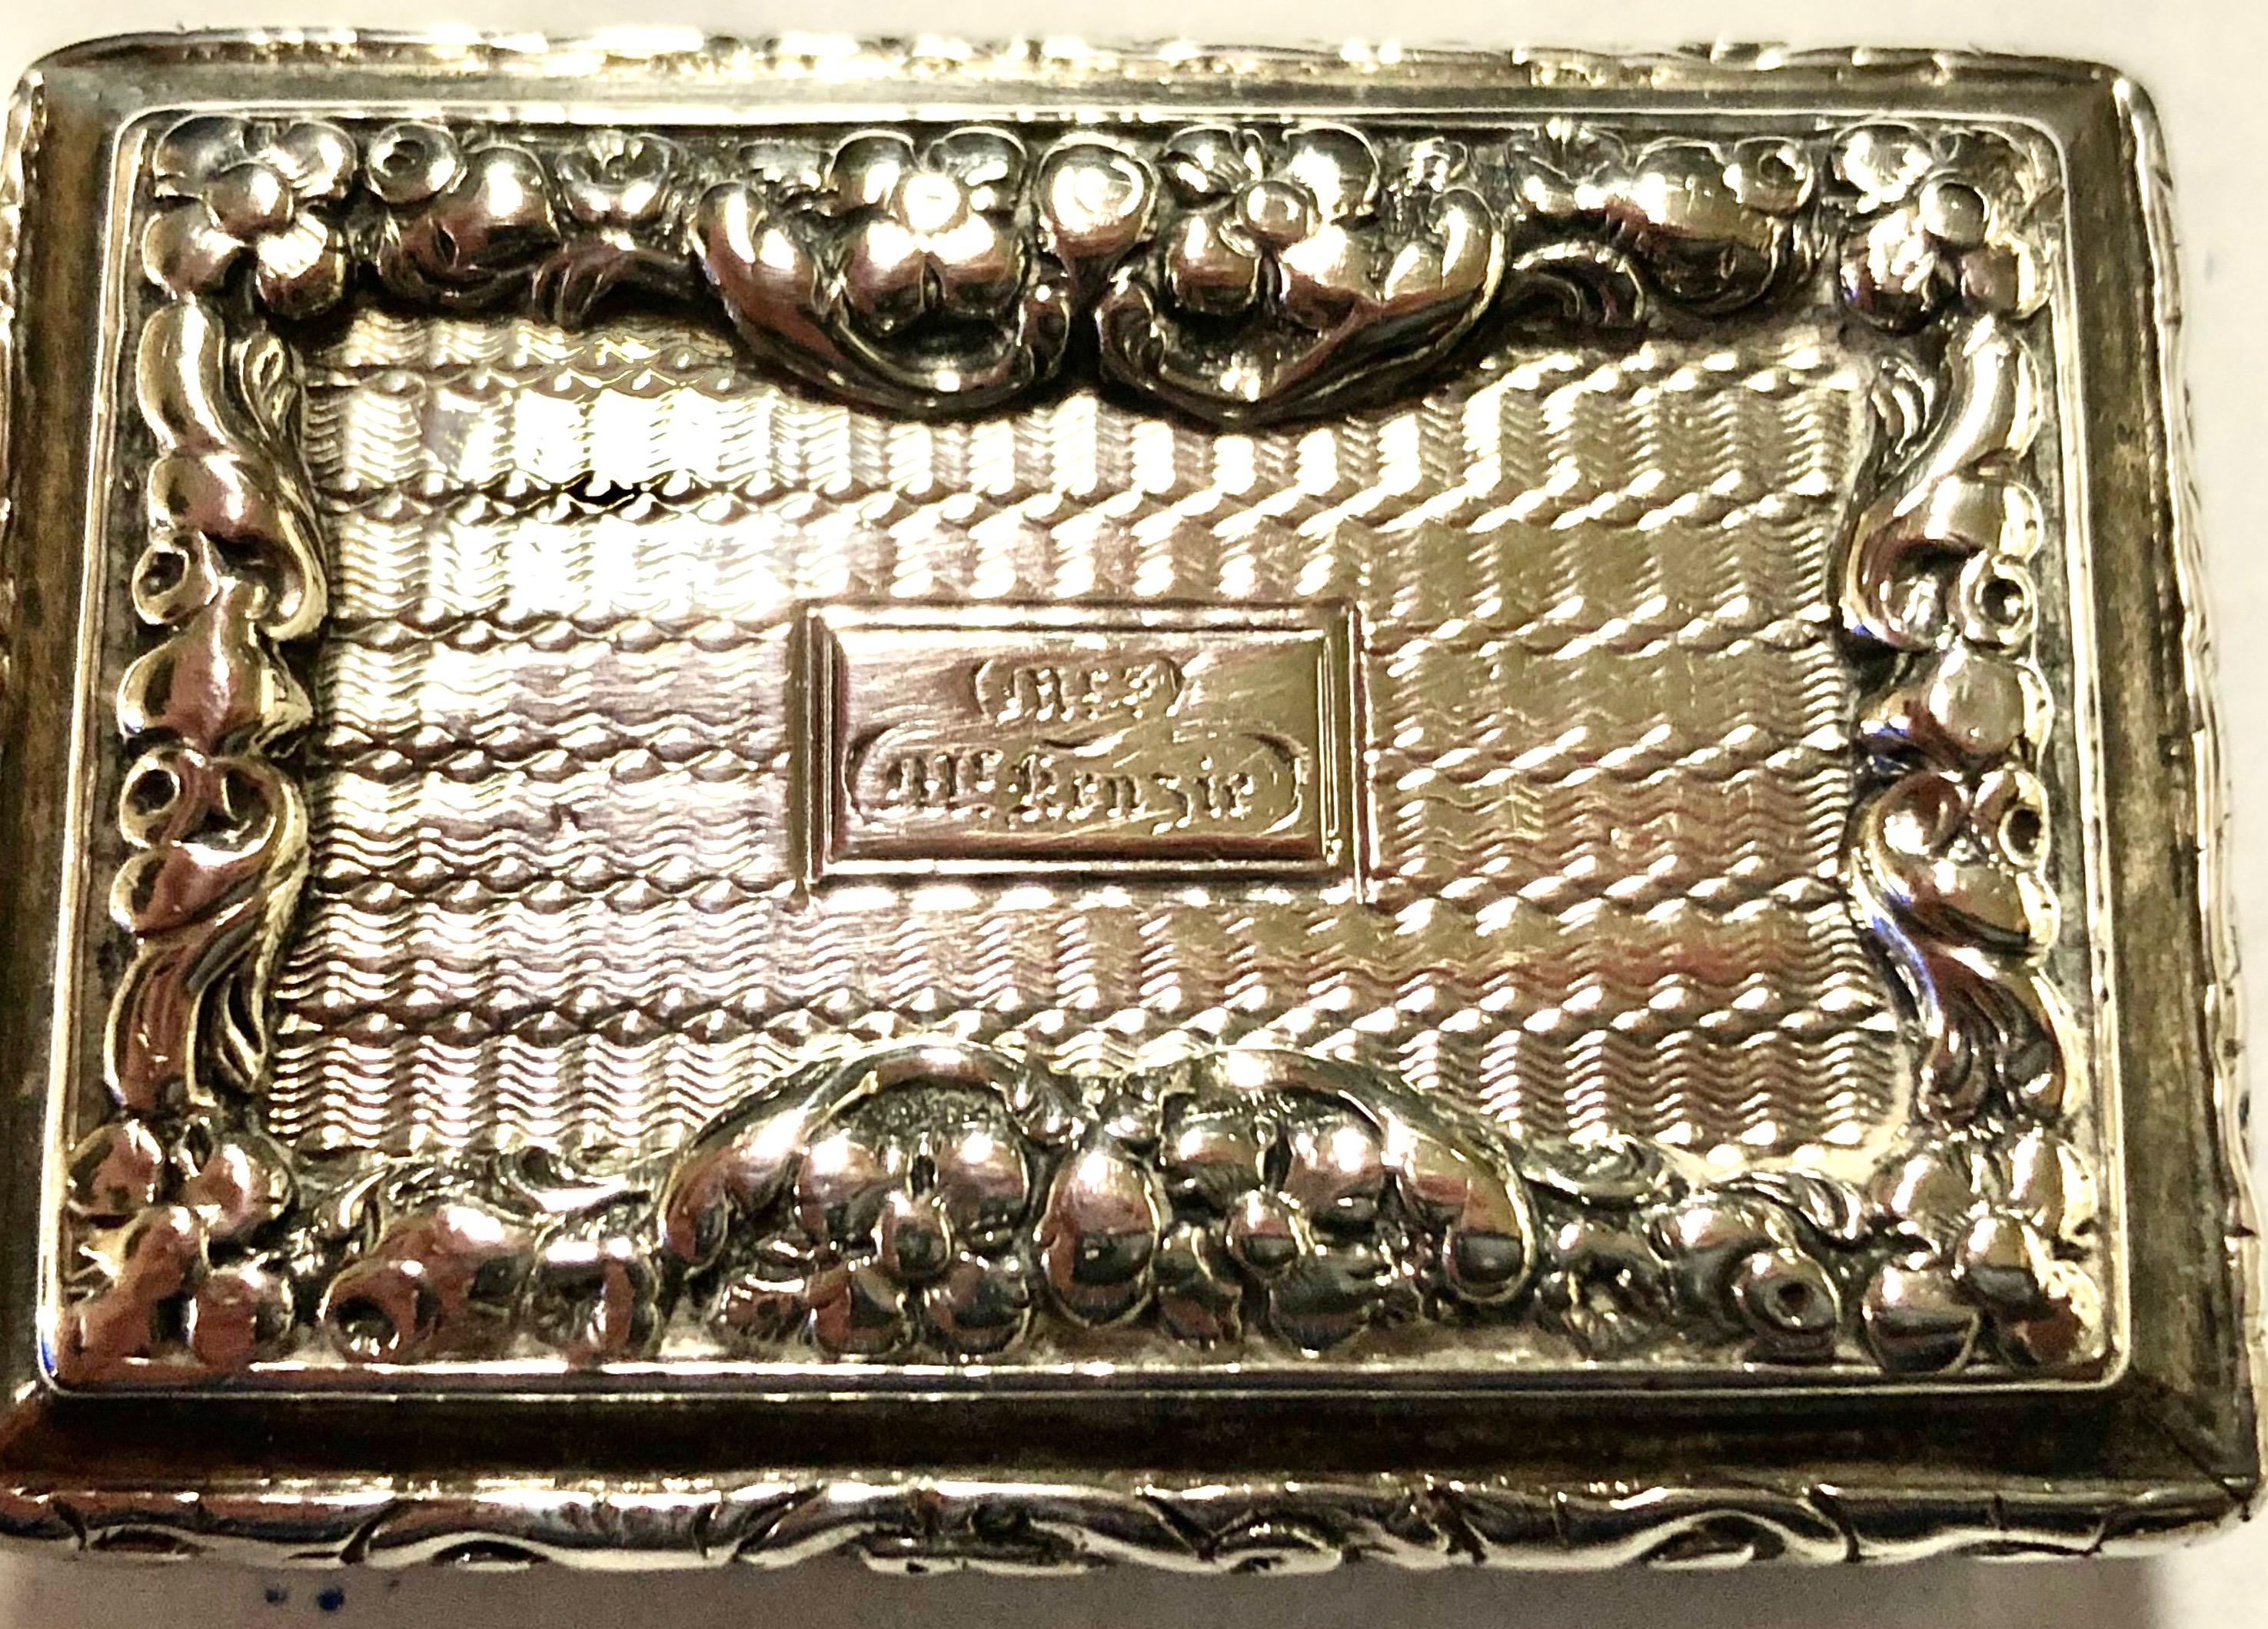 Fabulous and rare antique English hand pierced and engraved sterling vinaigrette
Hallmarked throughout, Birmingham, 1838-1839. Please note exceptional pierced and engraved fold out grille.
Maker's Marks for Britain's most sought after small box